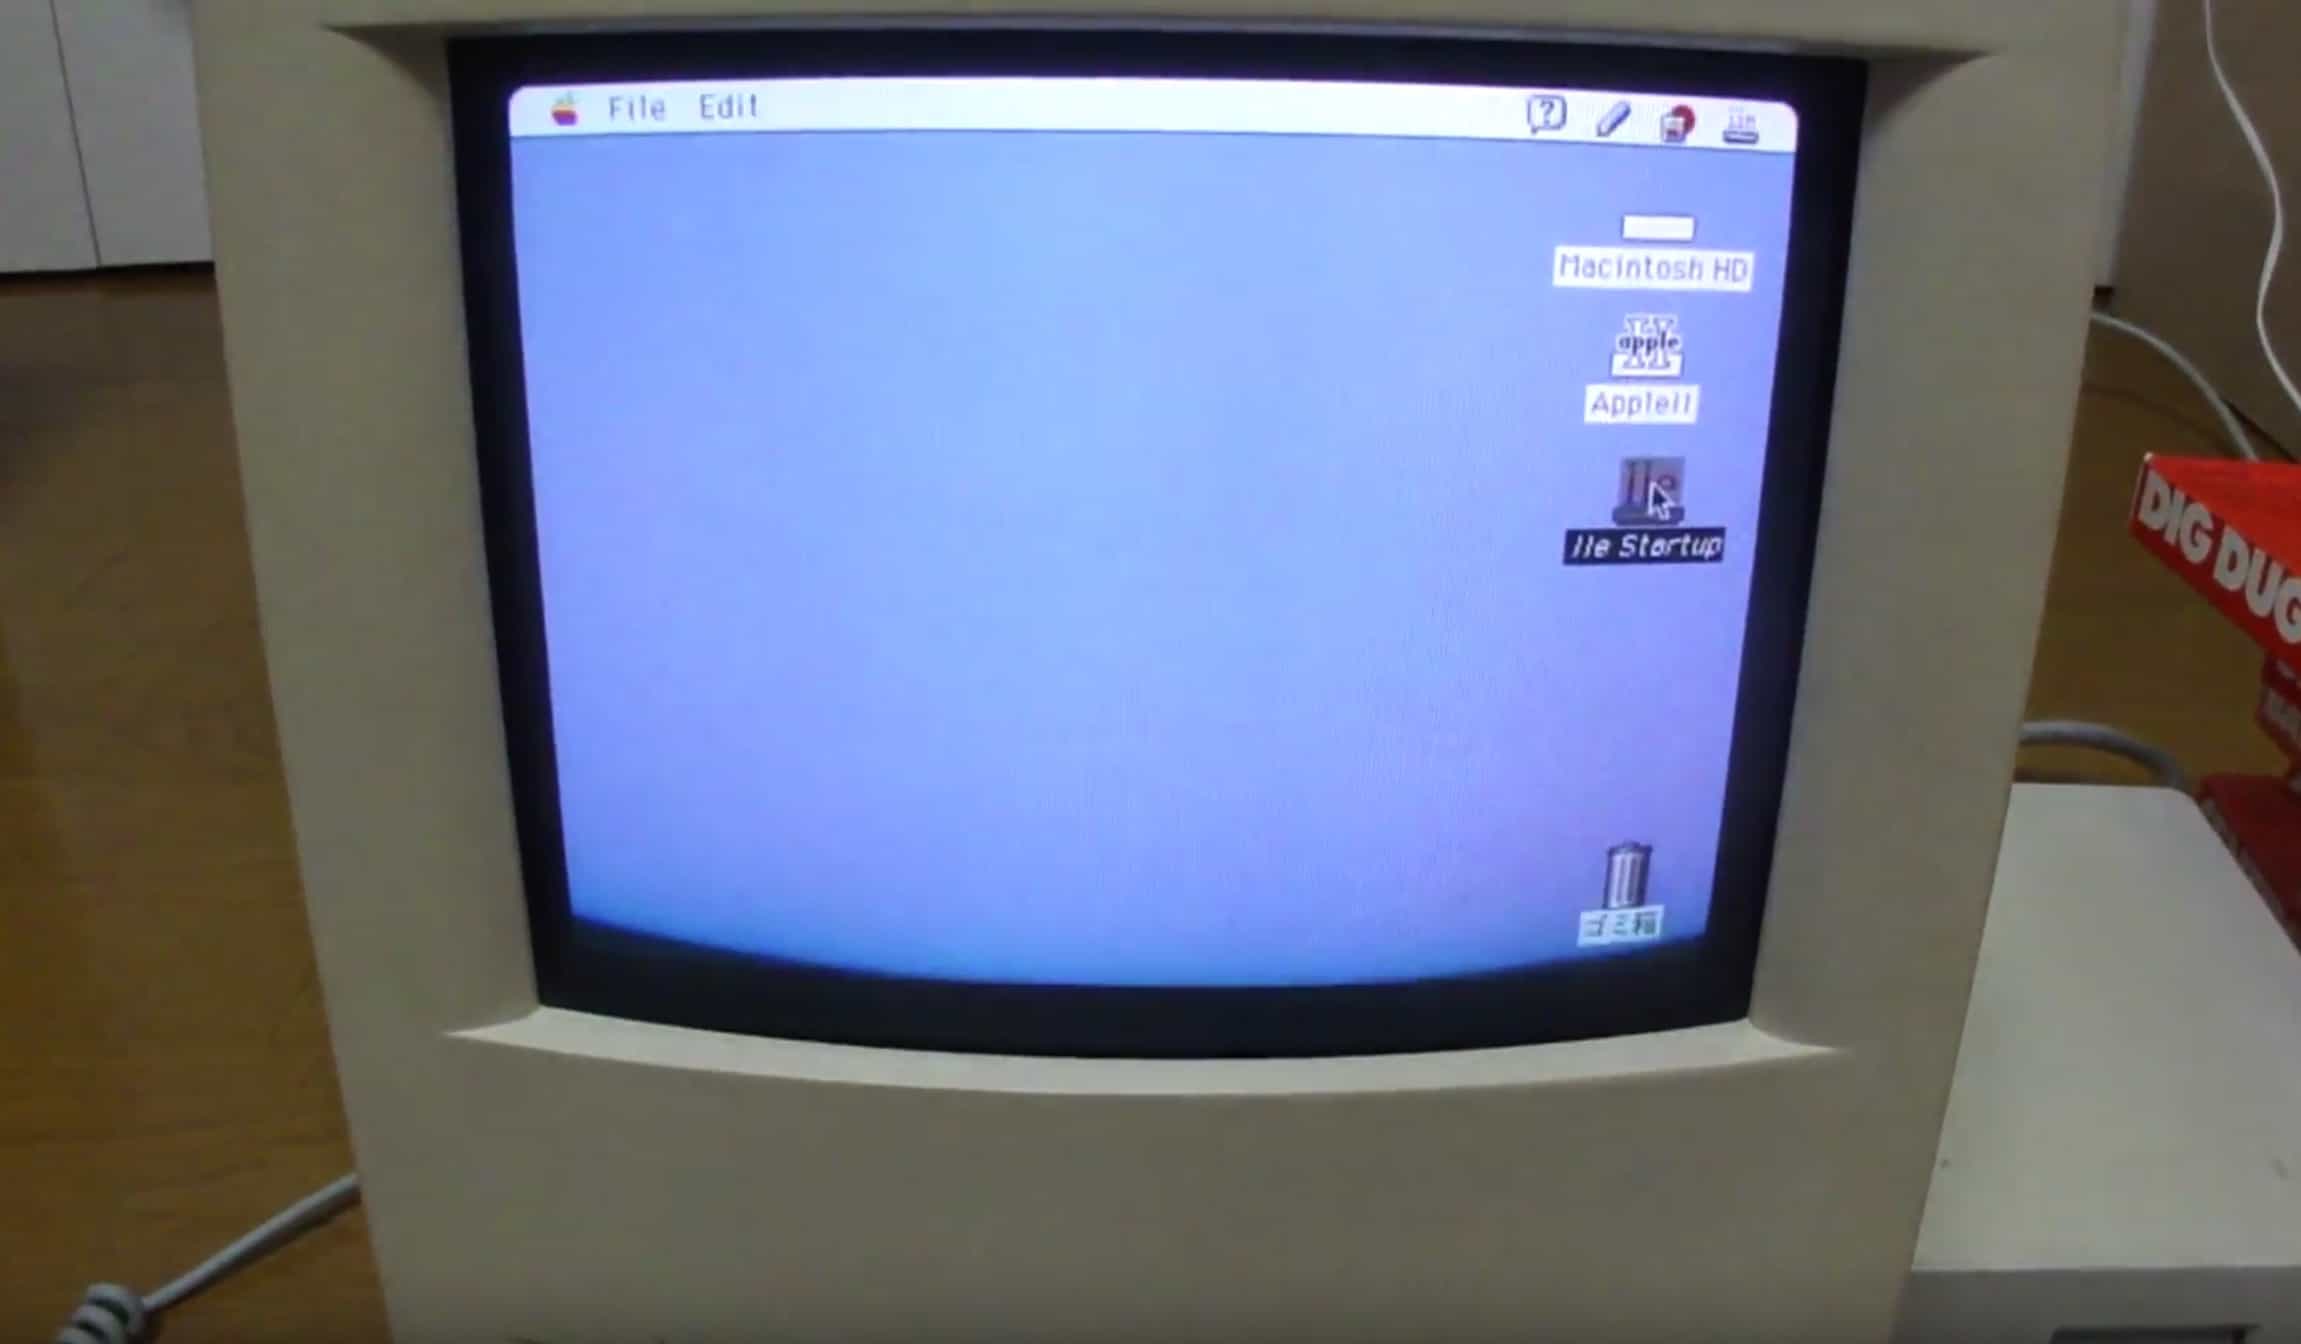 Running Apple II programs on a Mac with an Apple IIe Card was pretty darn awesome.